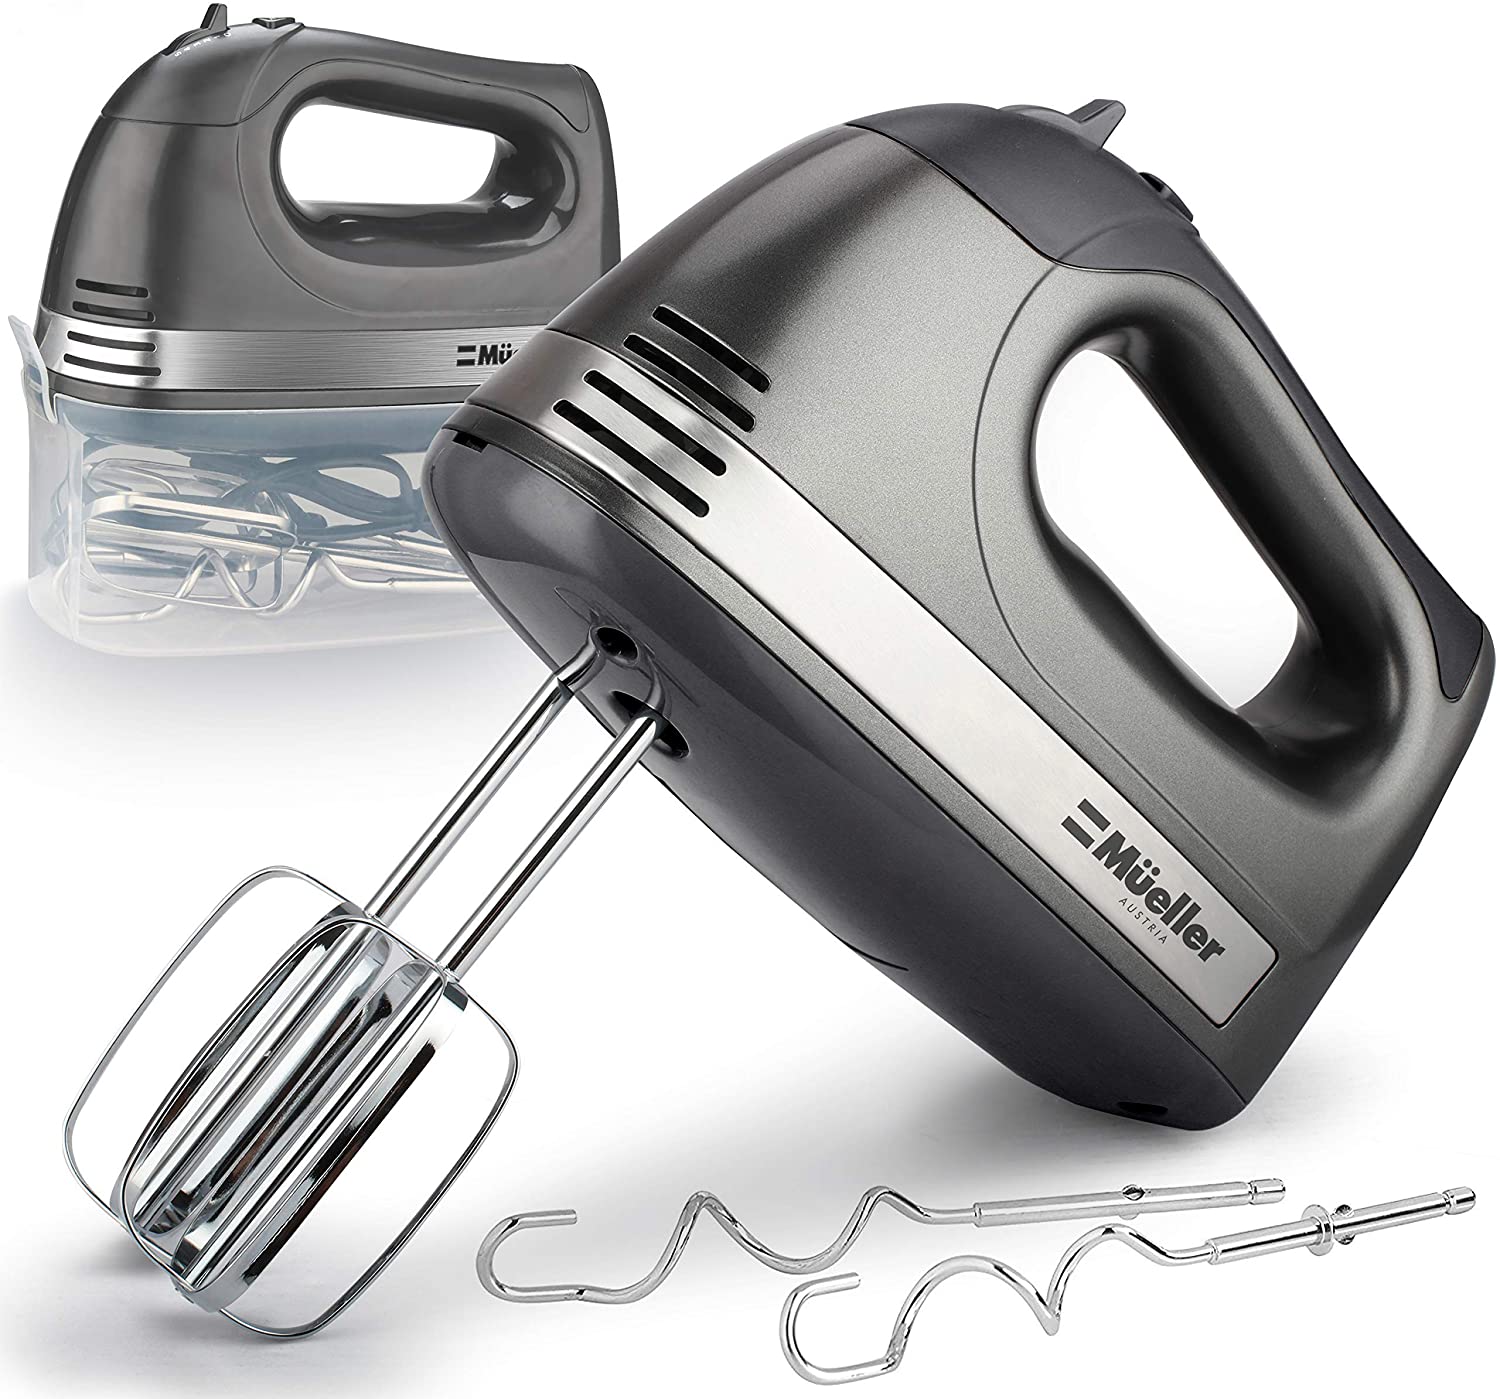 Mueller Electric Hand Mixer, 5 Speed 250W Turbo with Snap-On Storage Case